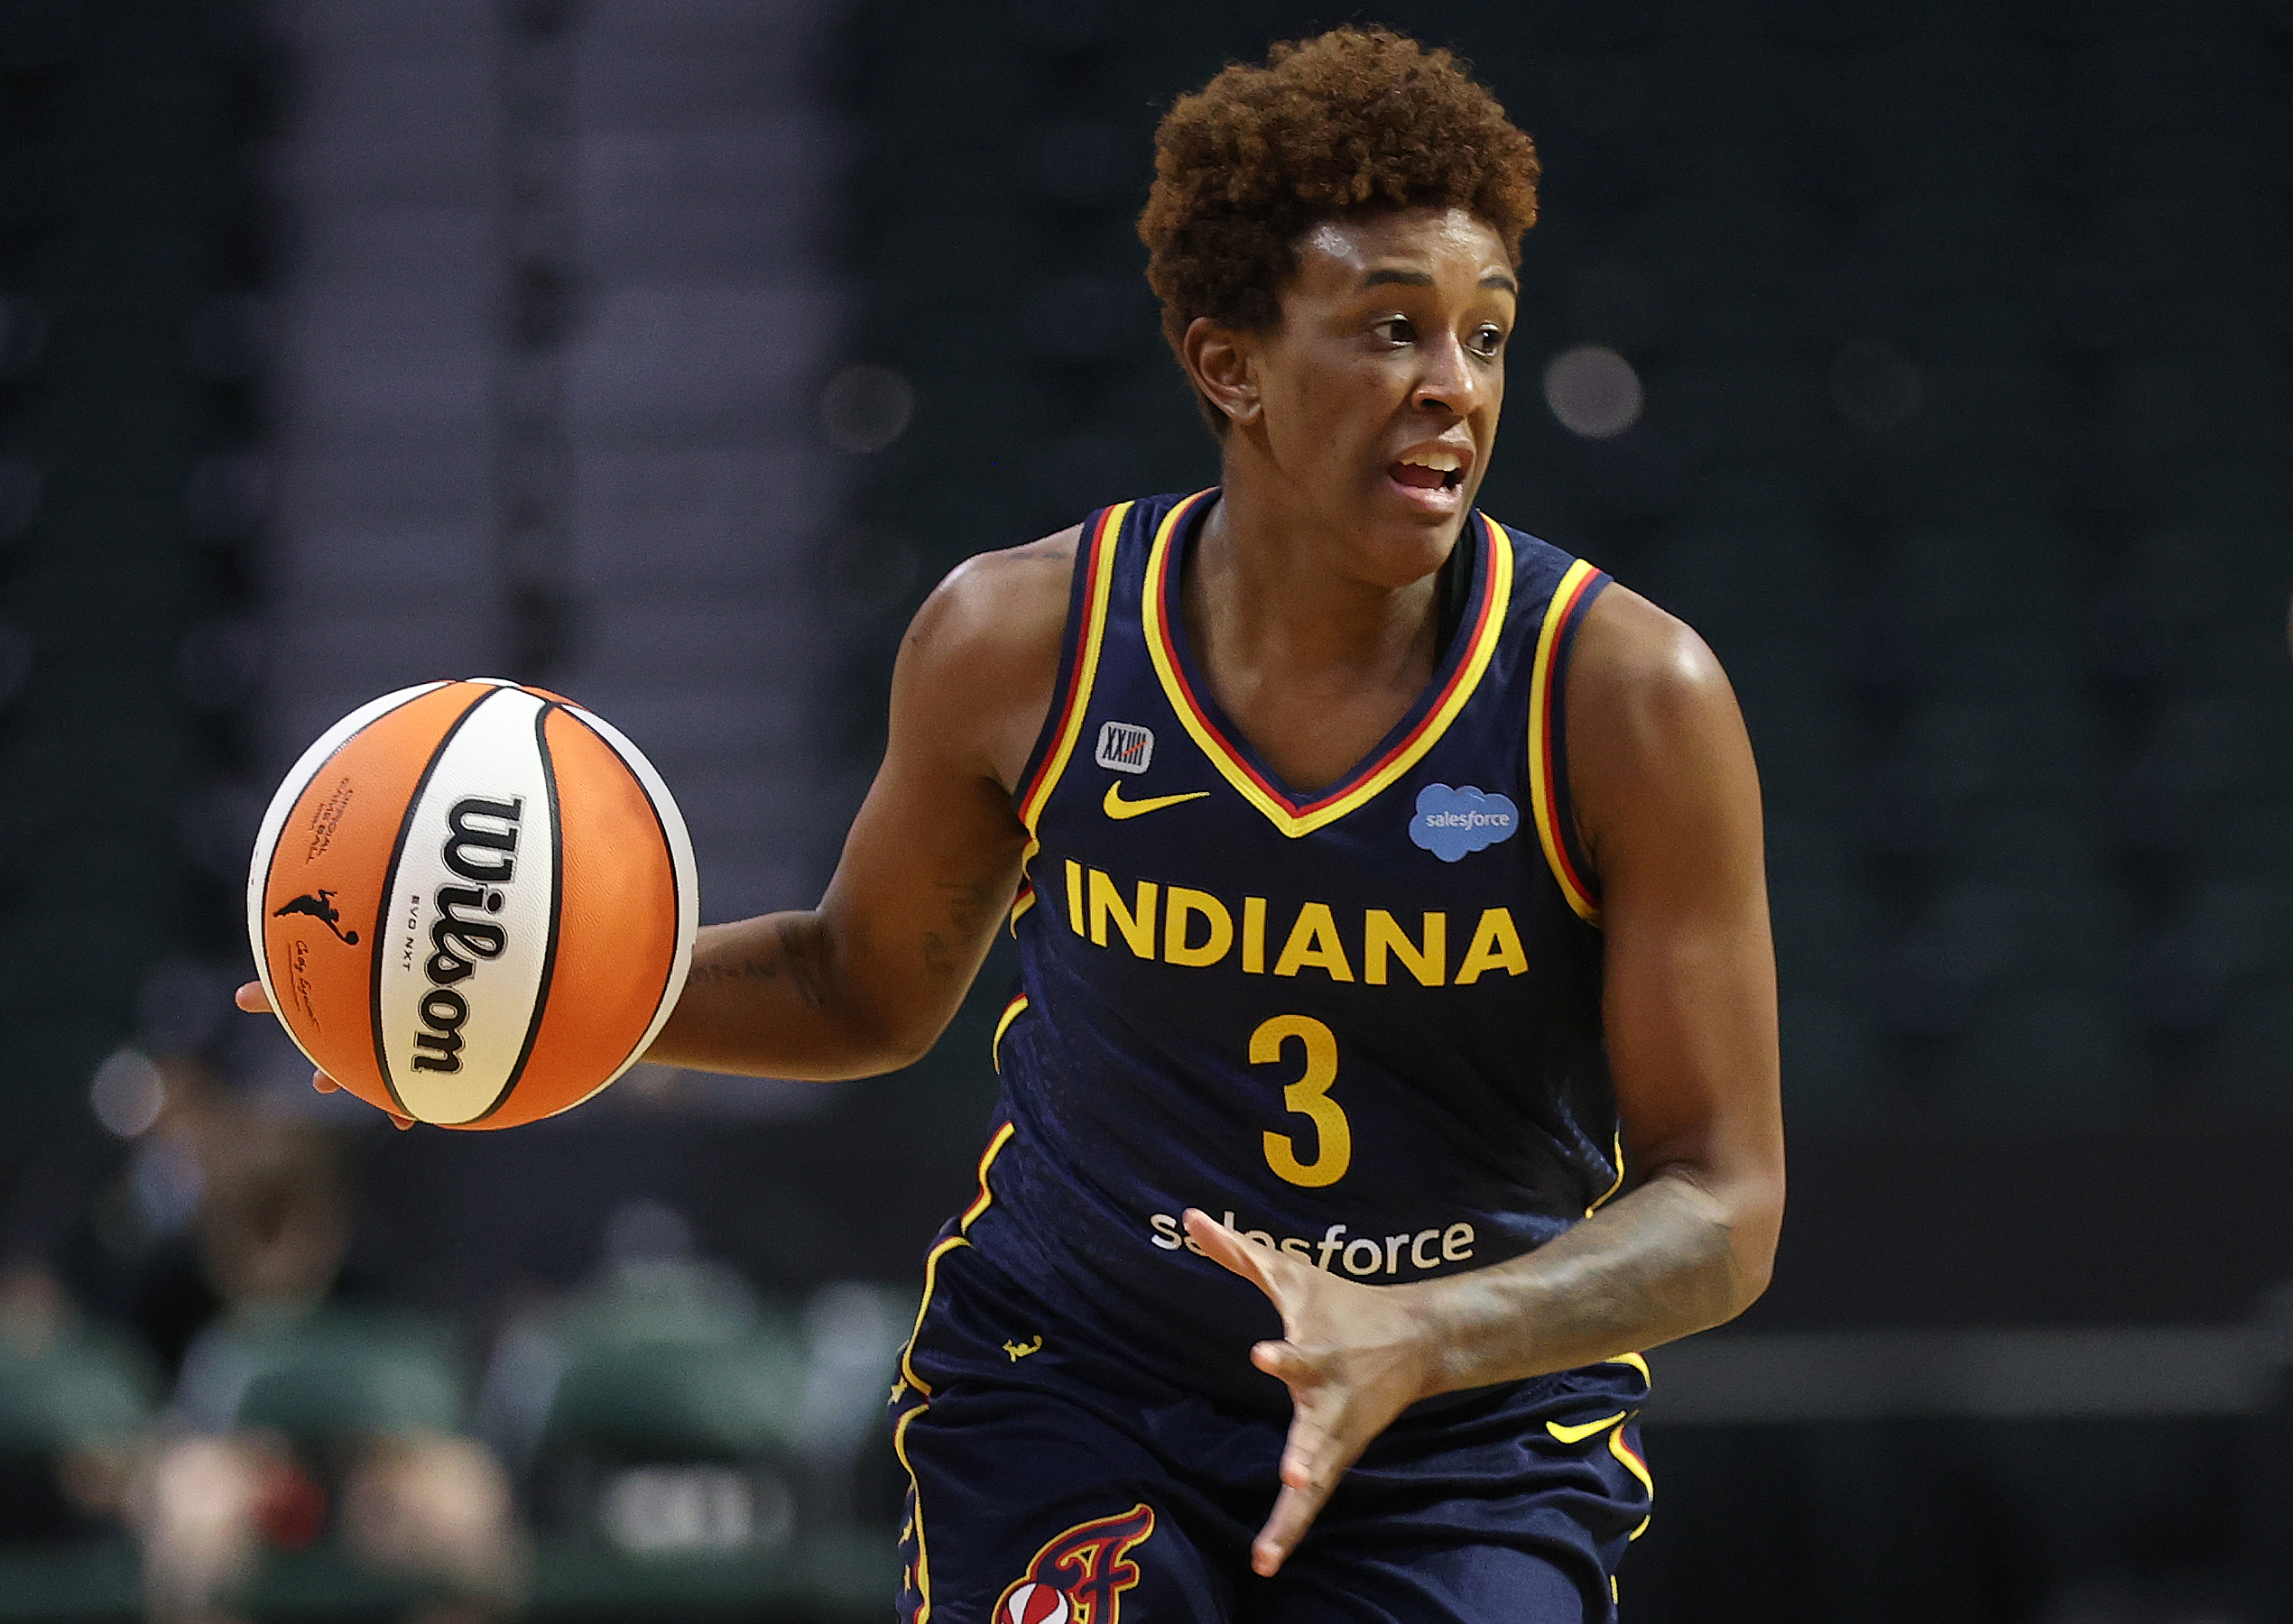 indiana fever players